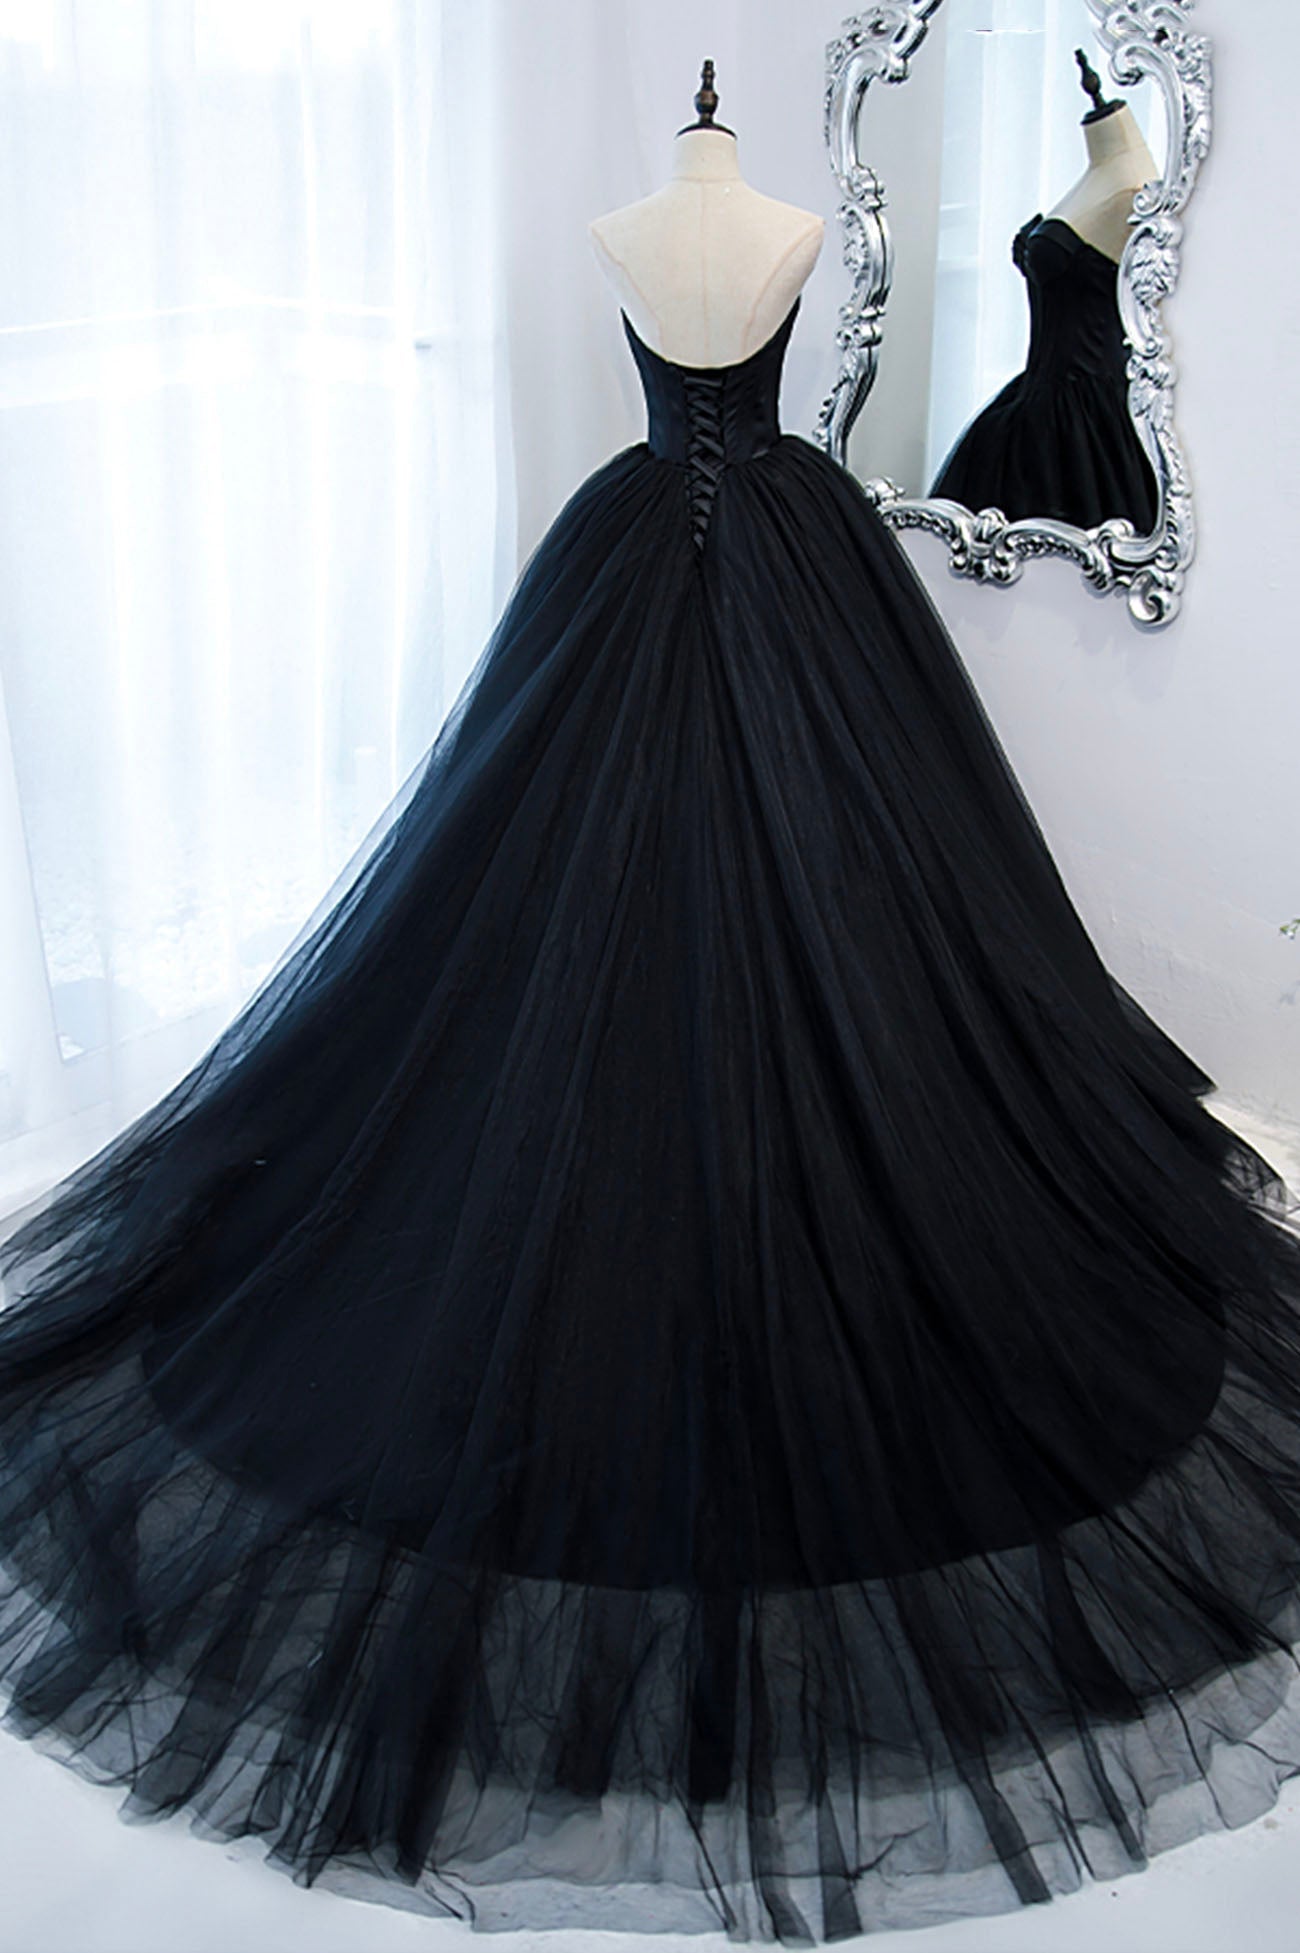 Homecoming Dress Inspo, Black Strapless Tulle Long A-Line Prom Dress, Black Formal Evening Gown